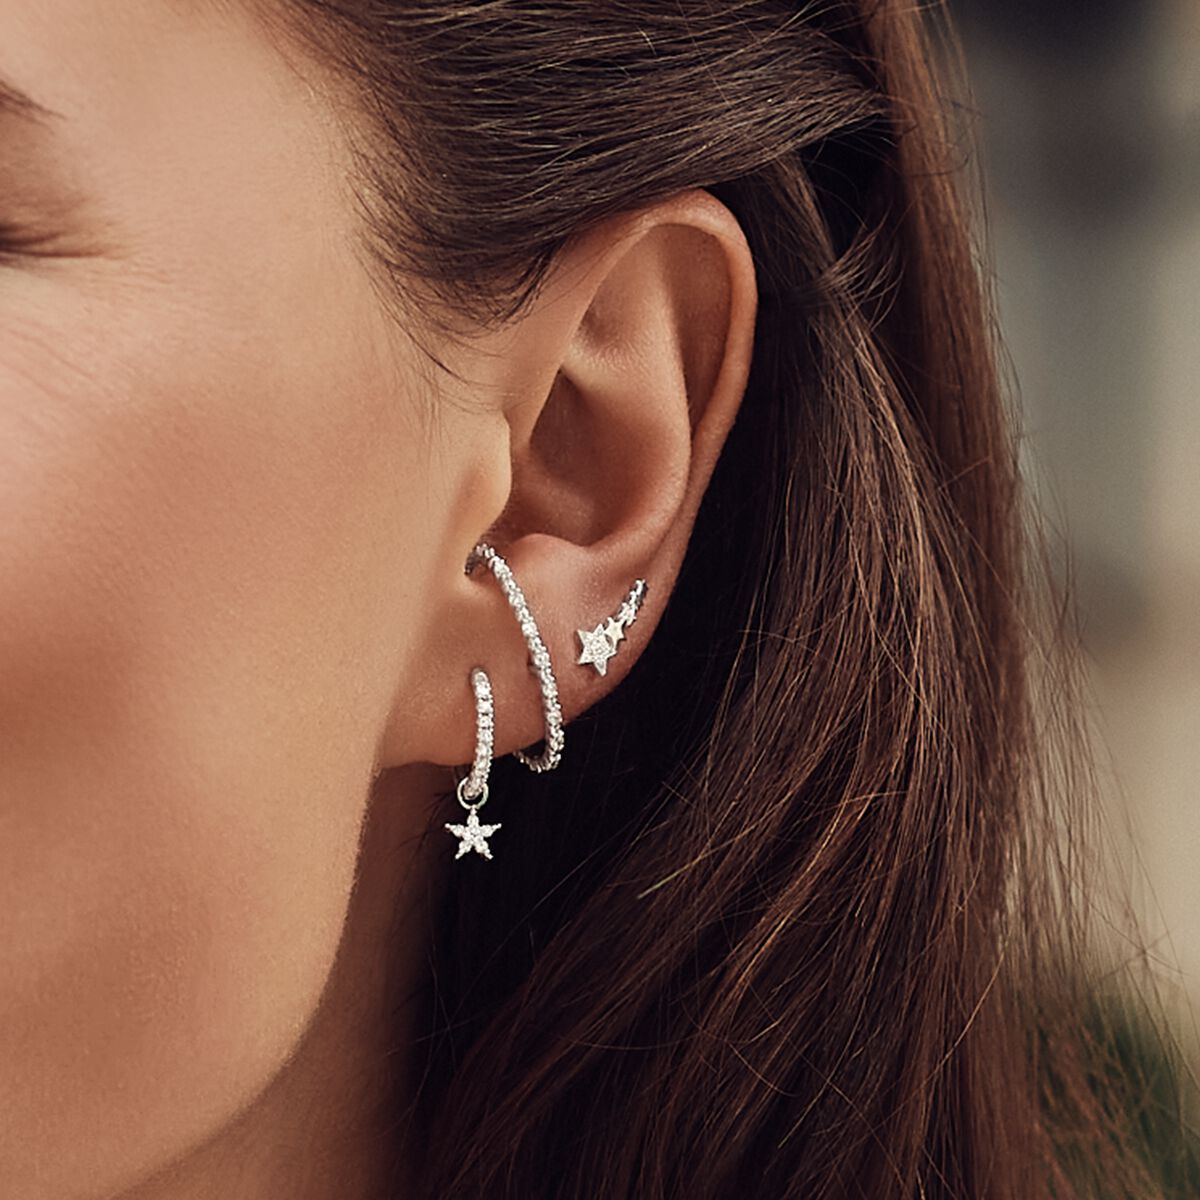 Conspicuous silver ear climbers THOMAS SABO –